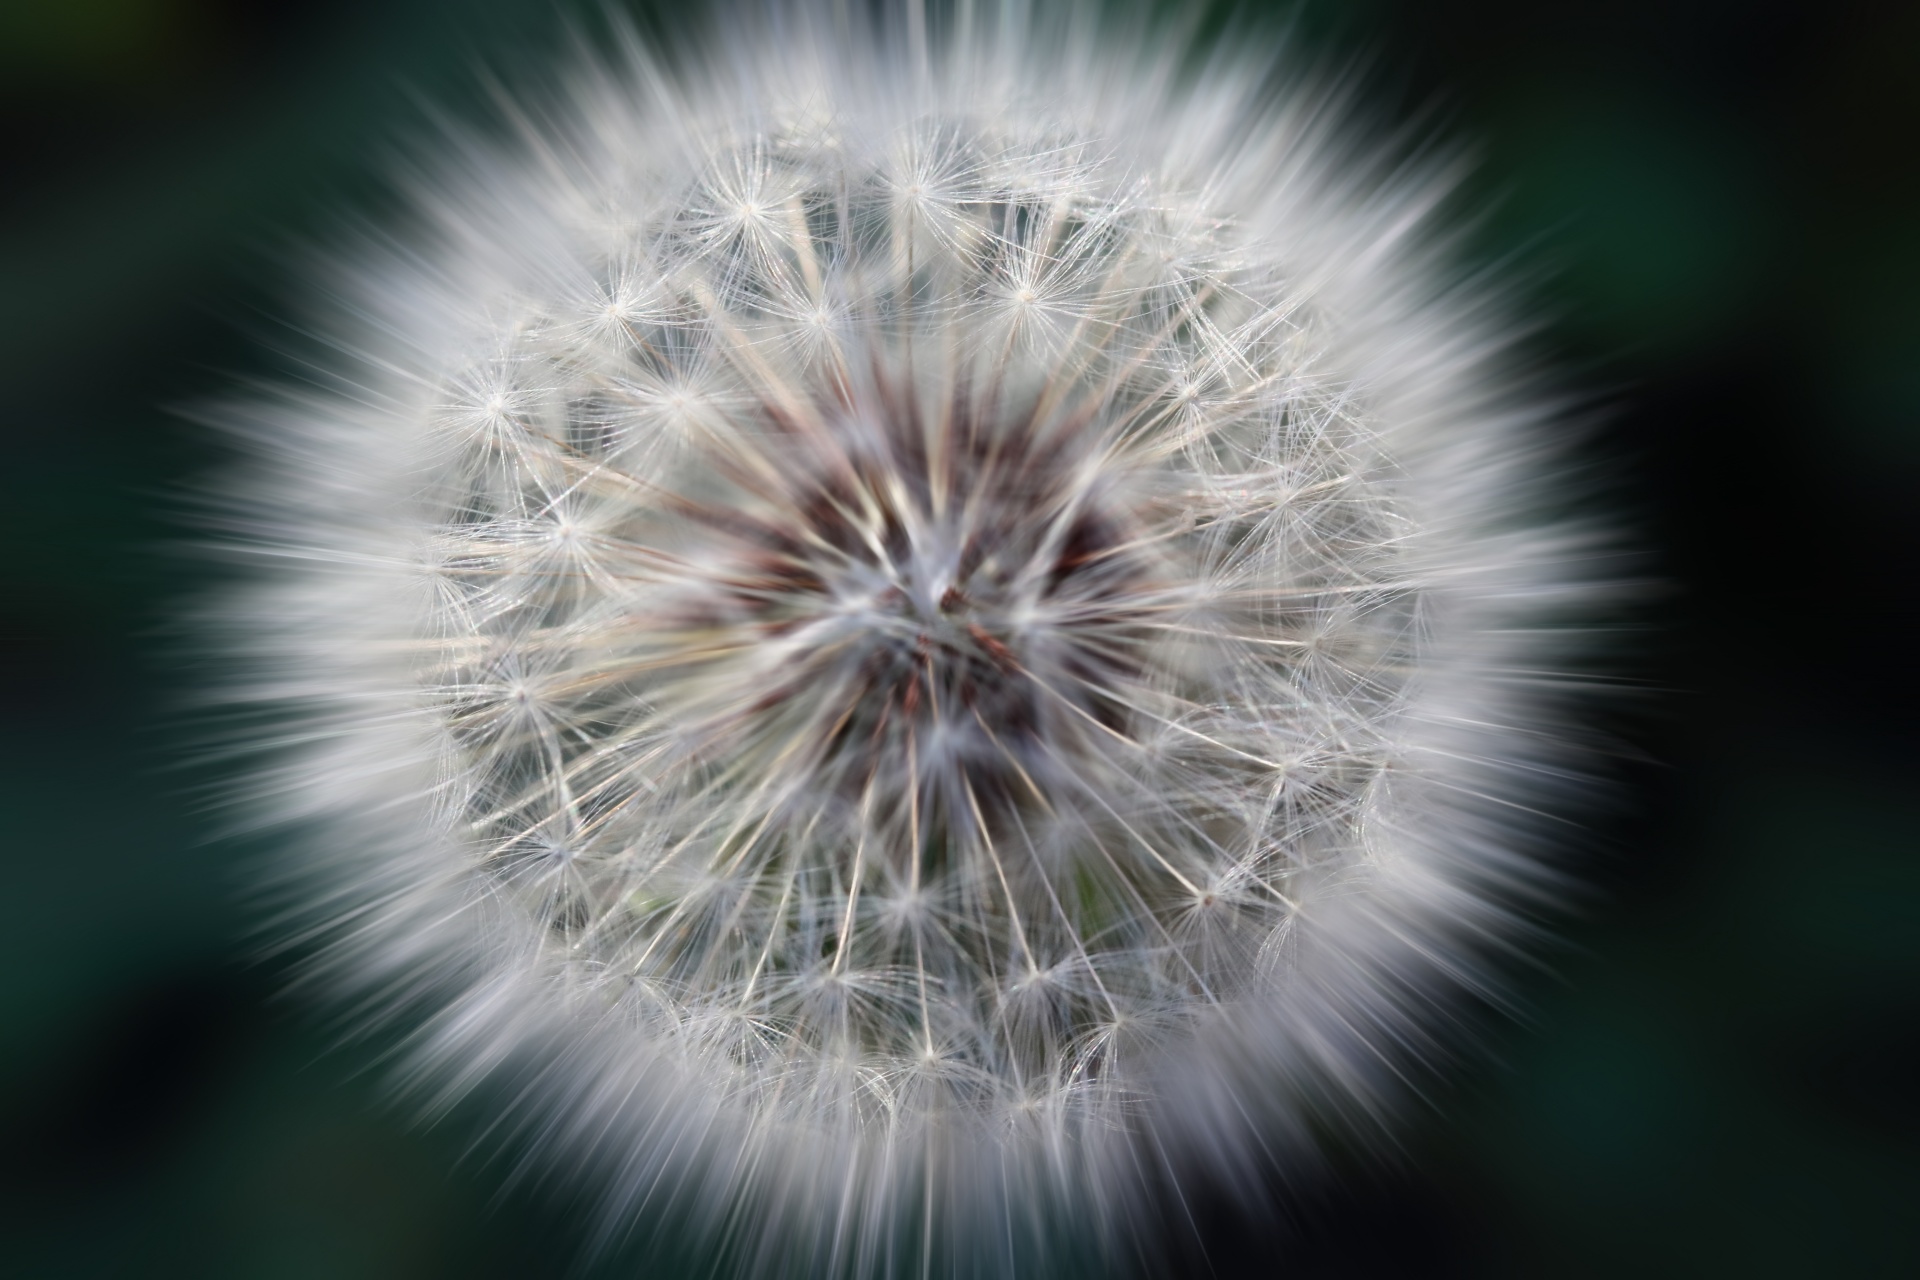 zoom burst effect with focus points on dandelion seedhead